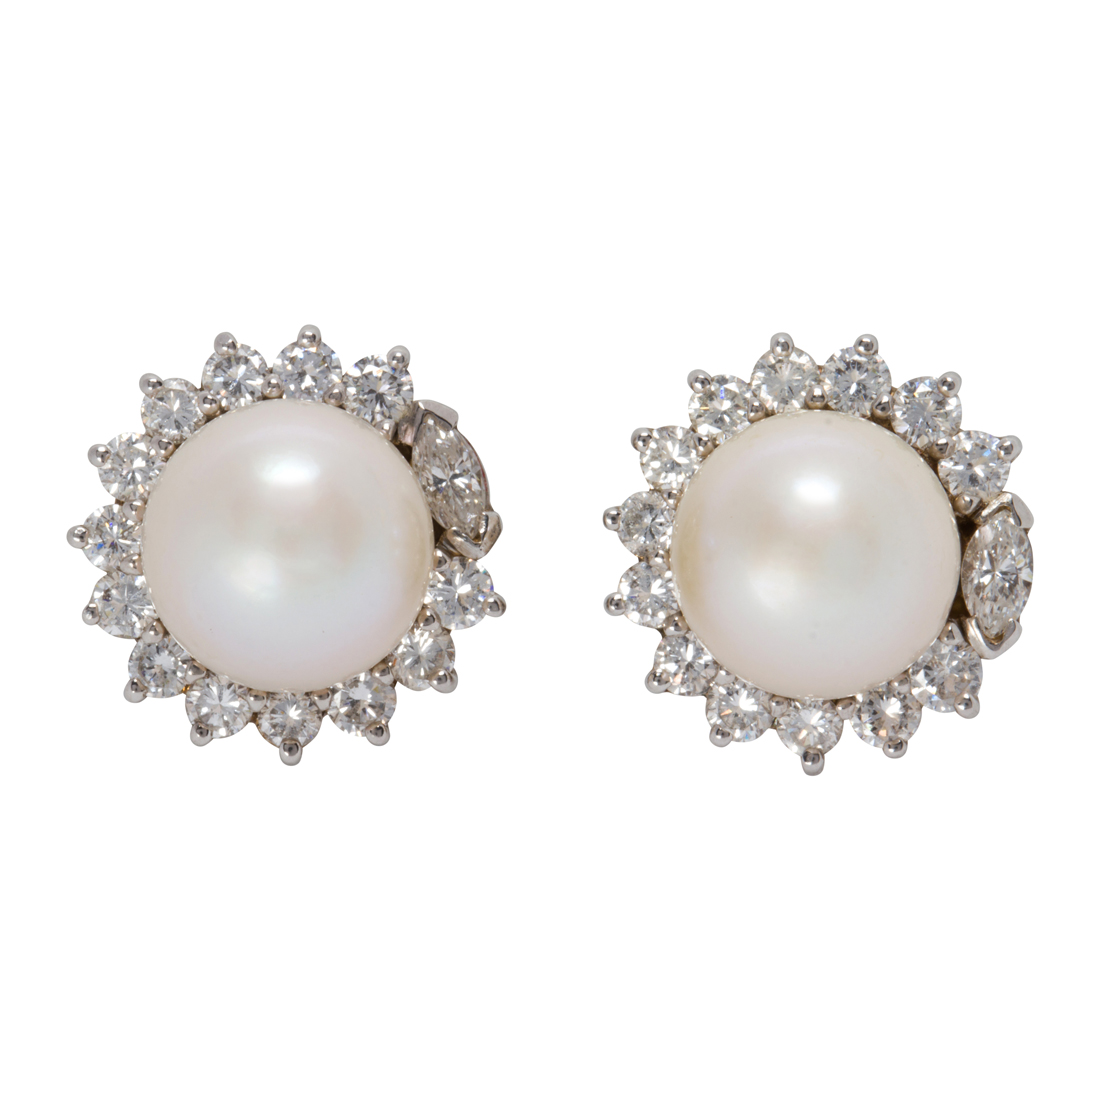 A PAIR OF CULTURED PEARL, DIAMOND